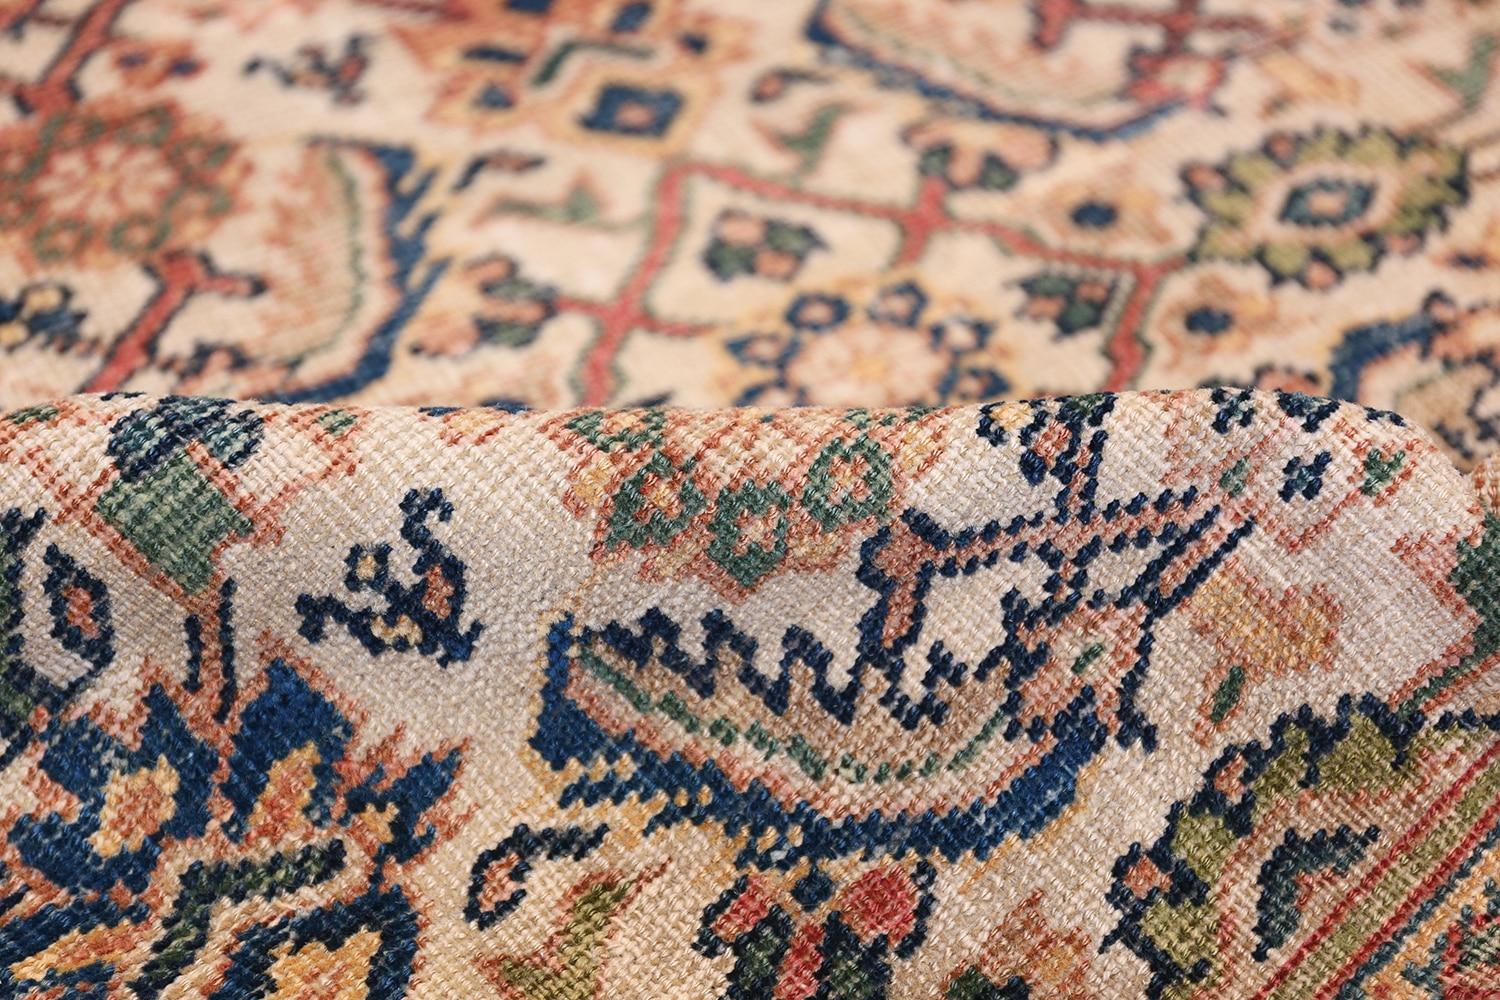 Hand-Knotted Antique Persian Sultanabad Carpet. Size: 8 ft x 10 ft 7 in (2.44 m x 3.23 m)